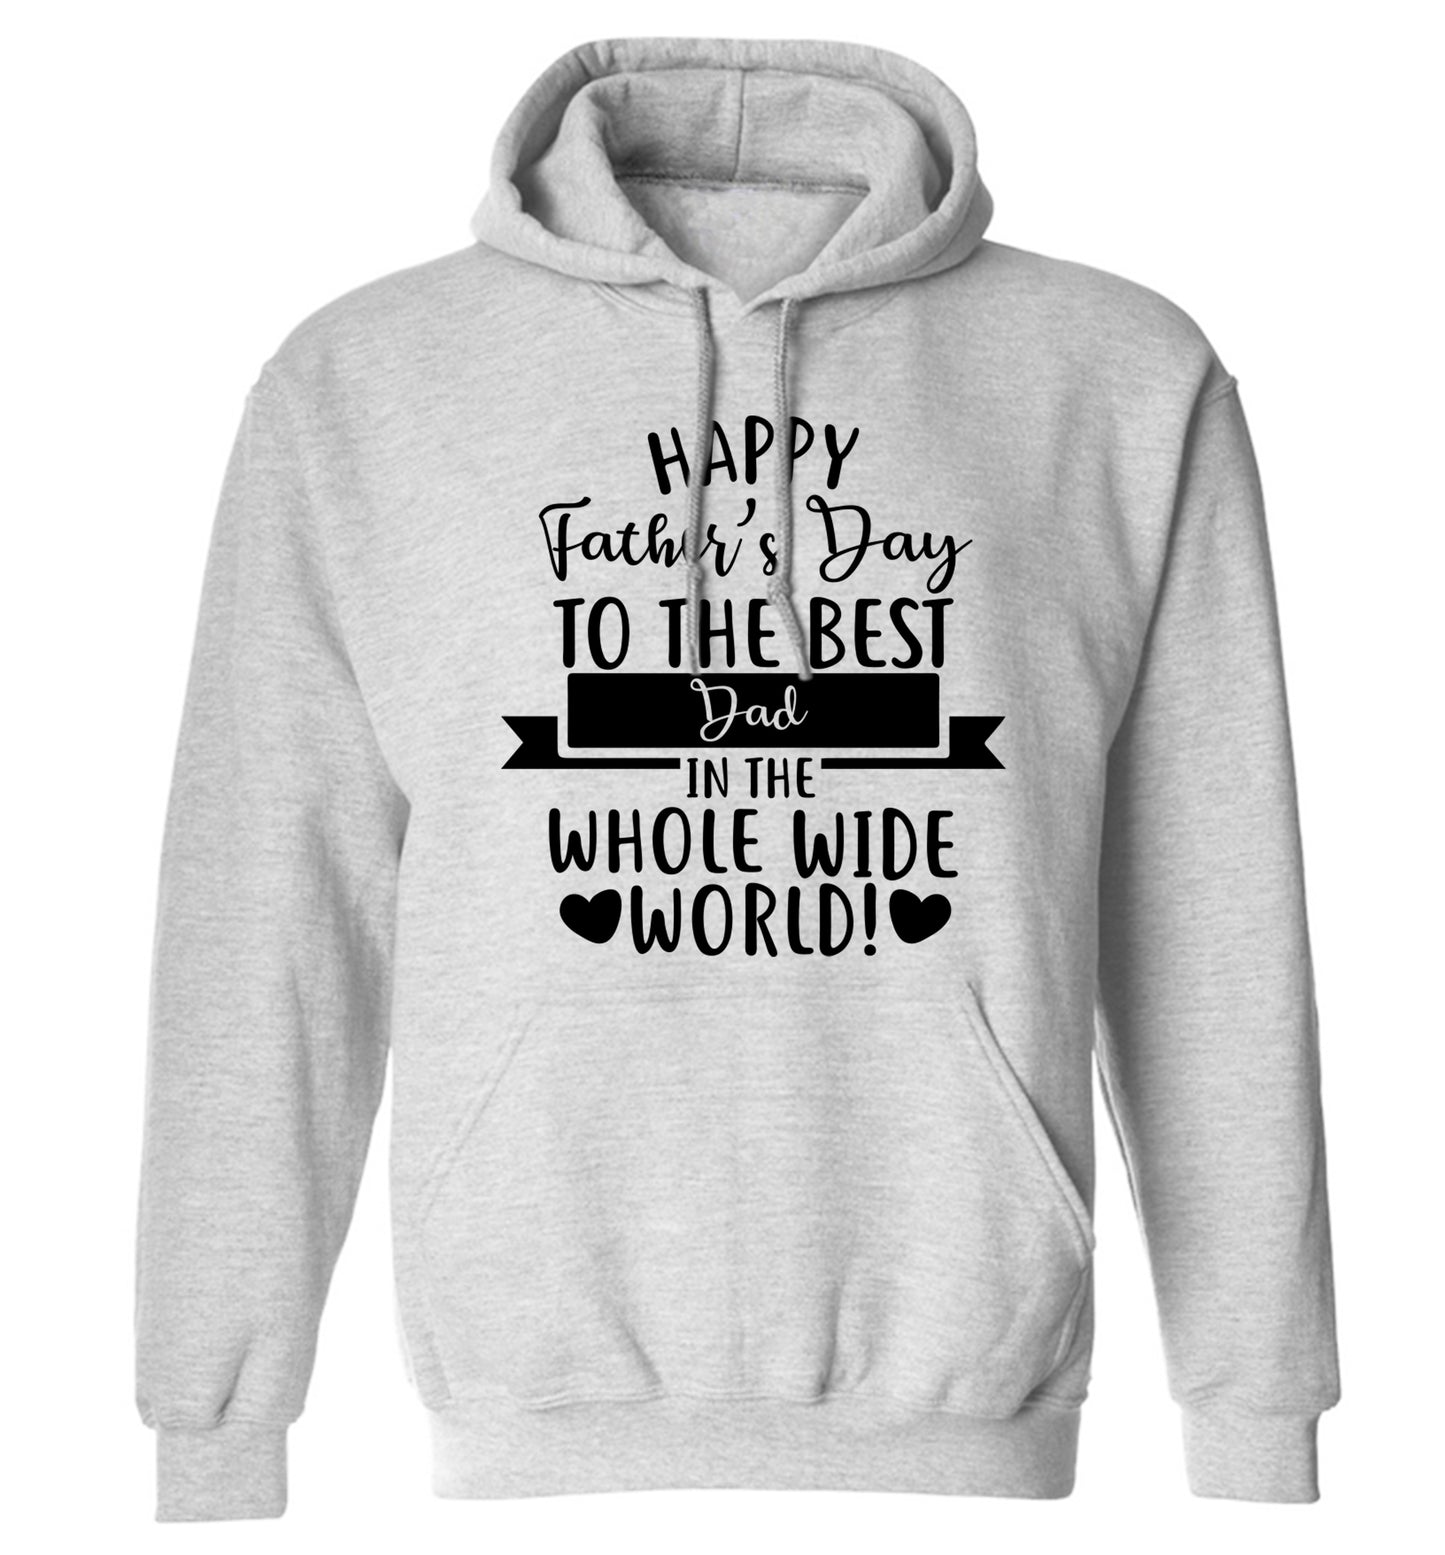 Happy Father's Day to the best father in the world! adults unisex grey hoodie 2XL